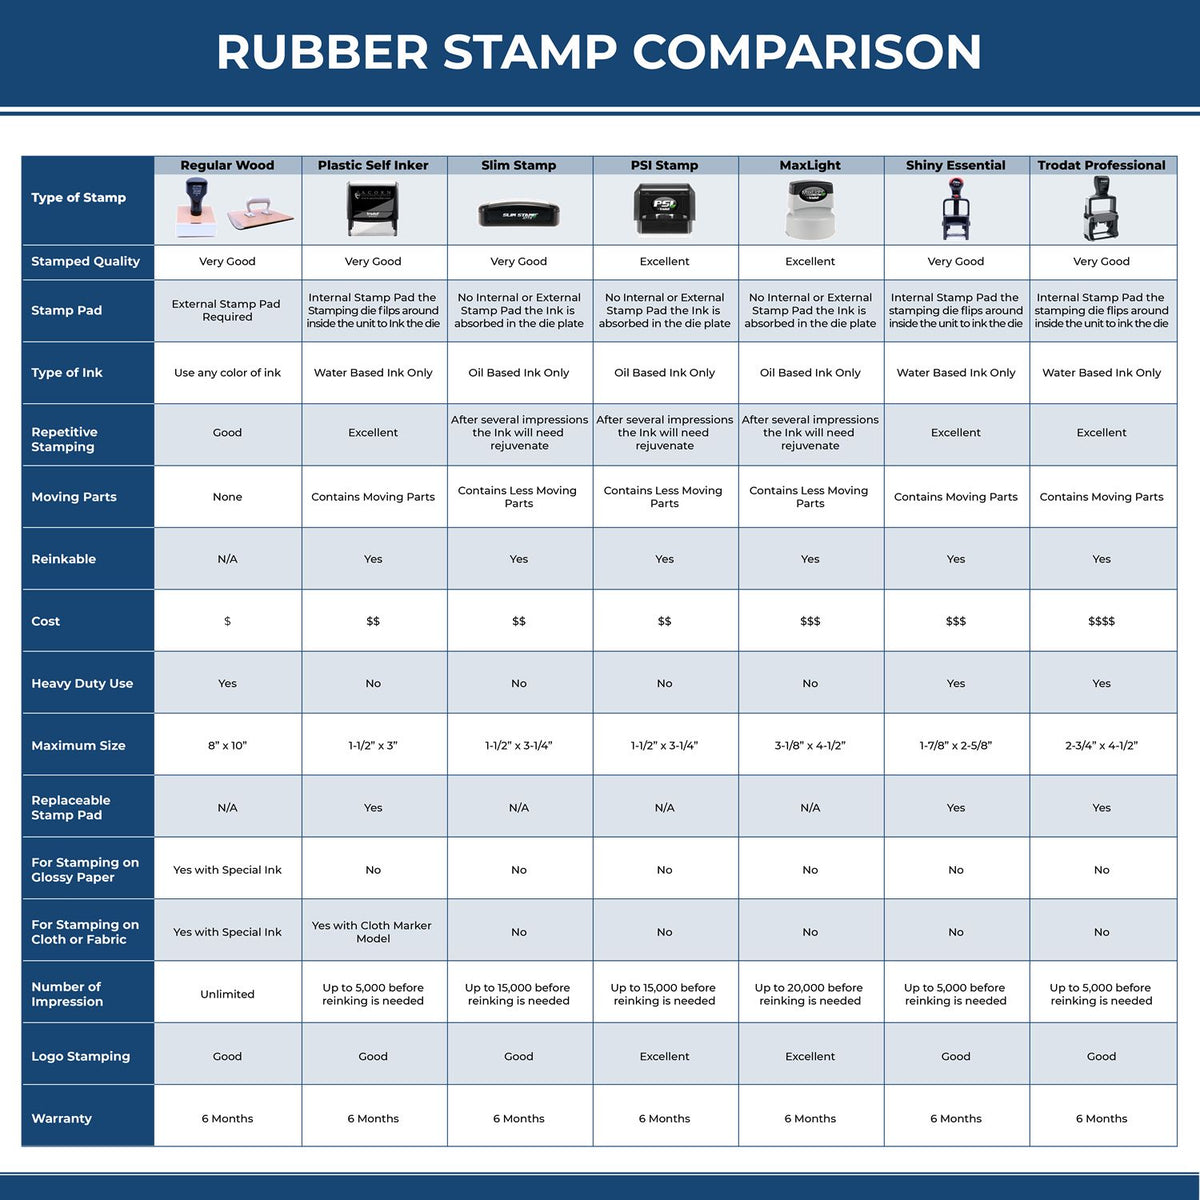 A comparison chart for the different types of mount models available for the Super Slim Connecticut Notary Public Stamp.